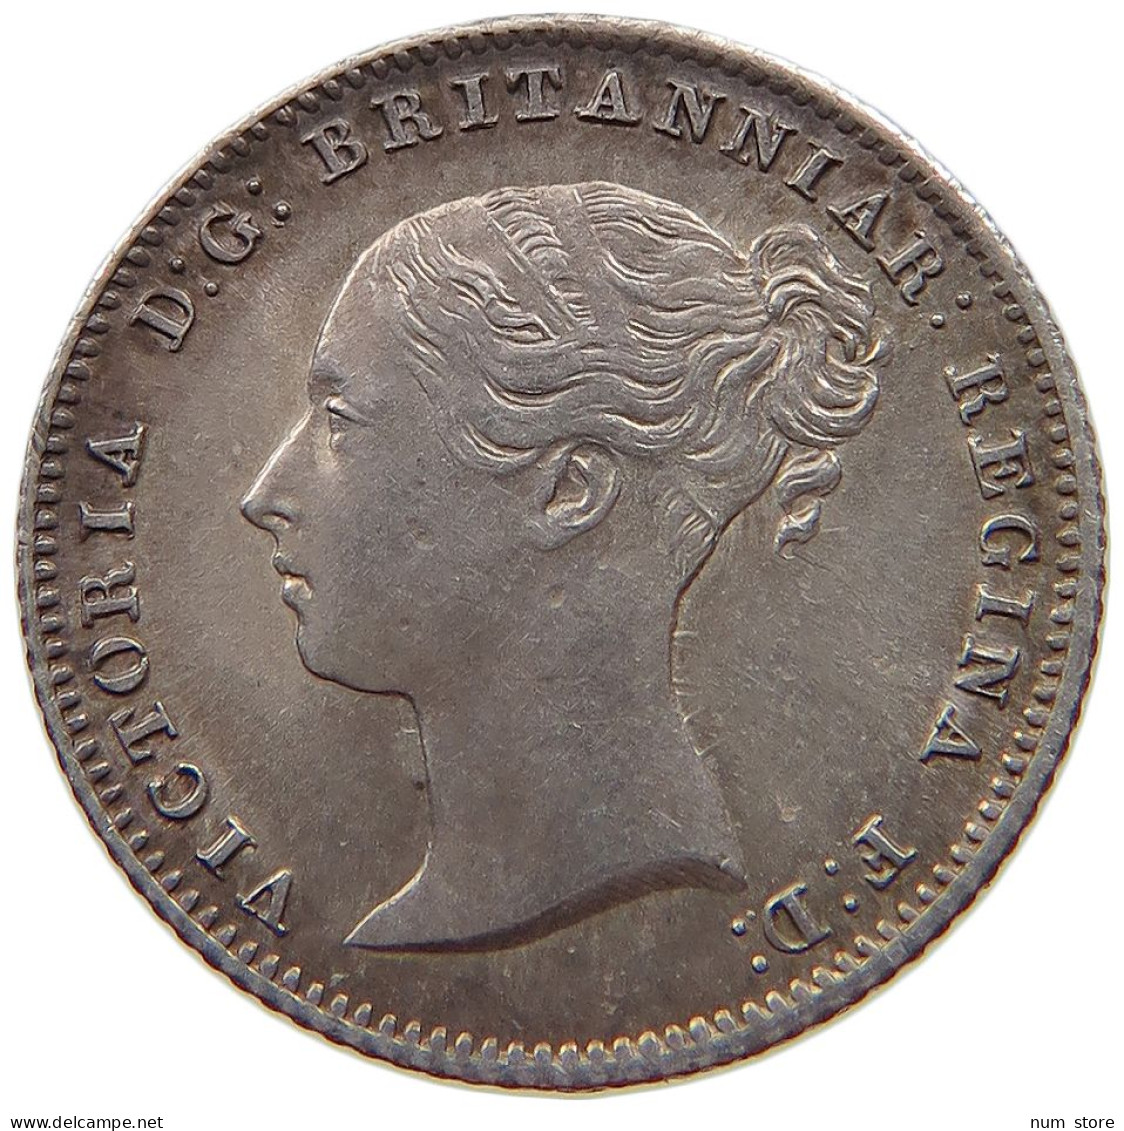 GREAT BRITAIN FOURPENCE 1854 Victoria 1837-1901 DOUBLE STRUCK DATE #t059 0133 - G. 4 Pence/ Groat